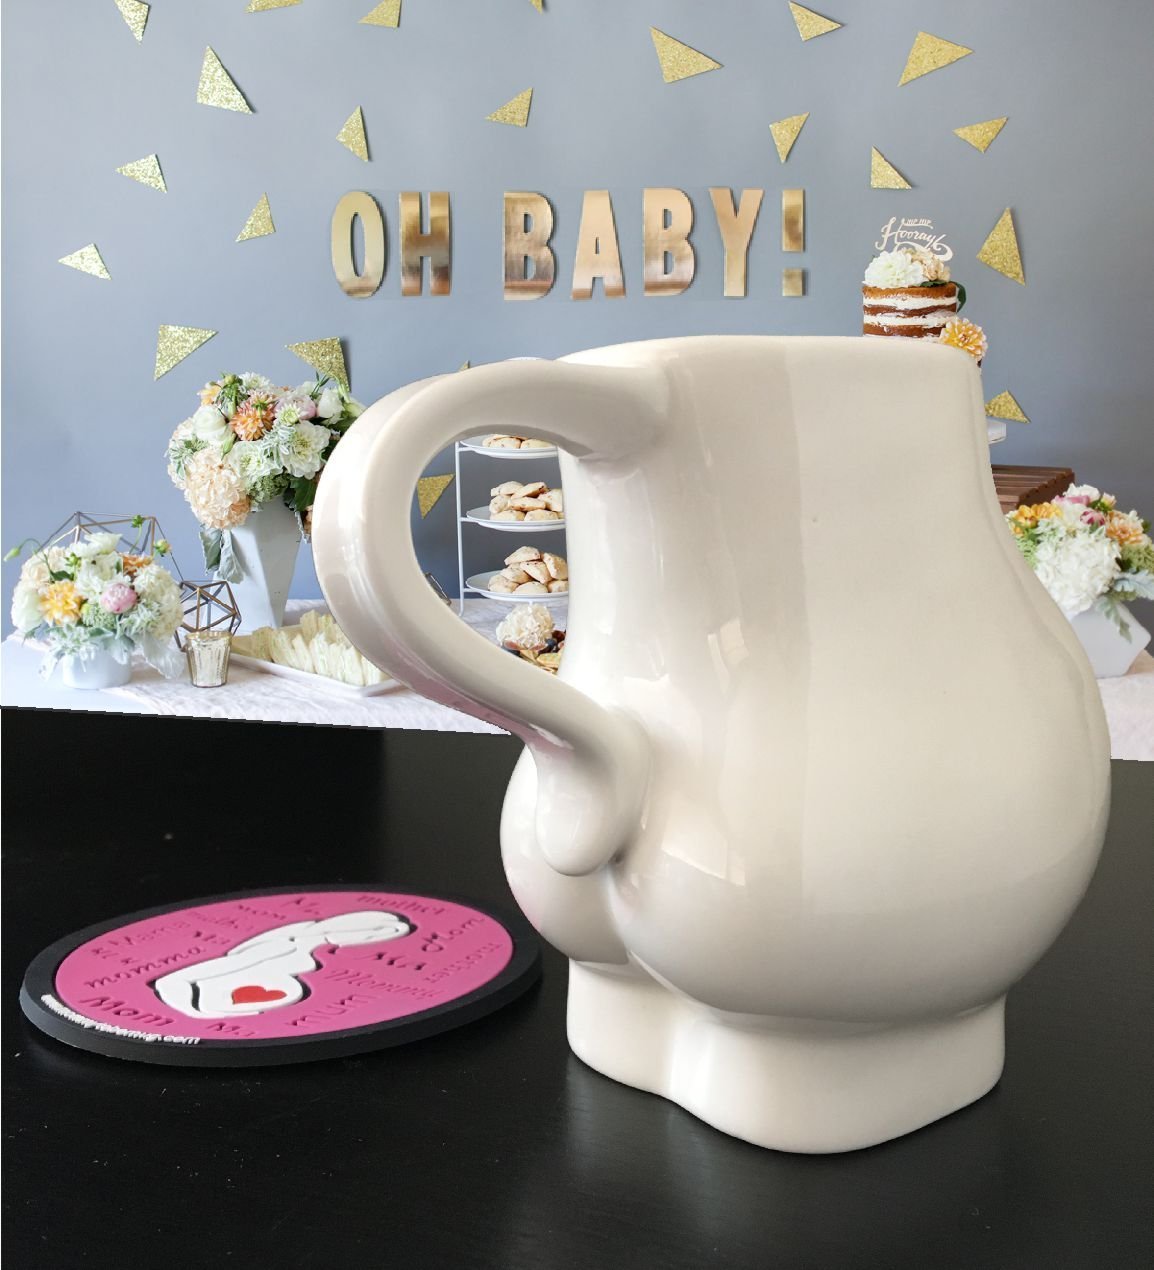 Perfect Funny Creative Baby Shower Gifts and Present Ideas for New Moms Mommy To Be Mug Baby Shower Gifts Idea for Pregnancy and Expecting Mothers 14OZ with BONUS Coaster